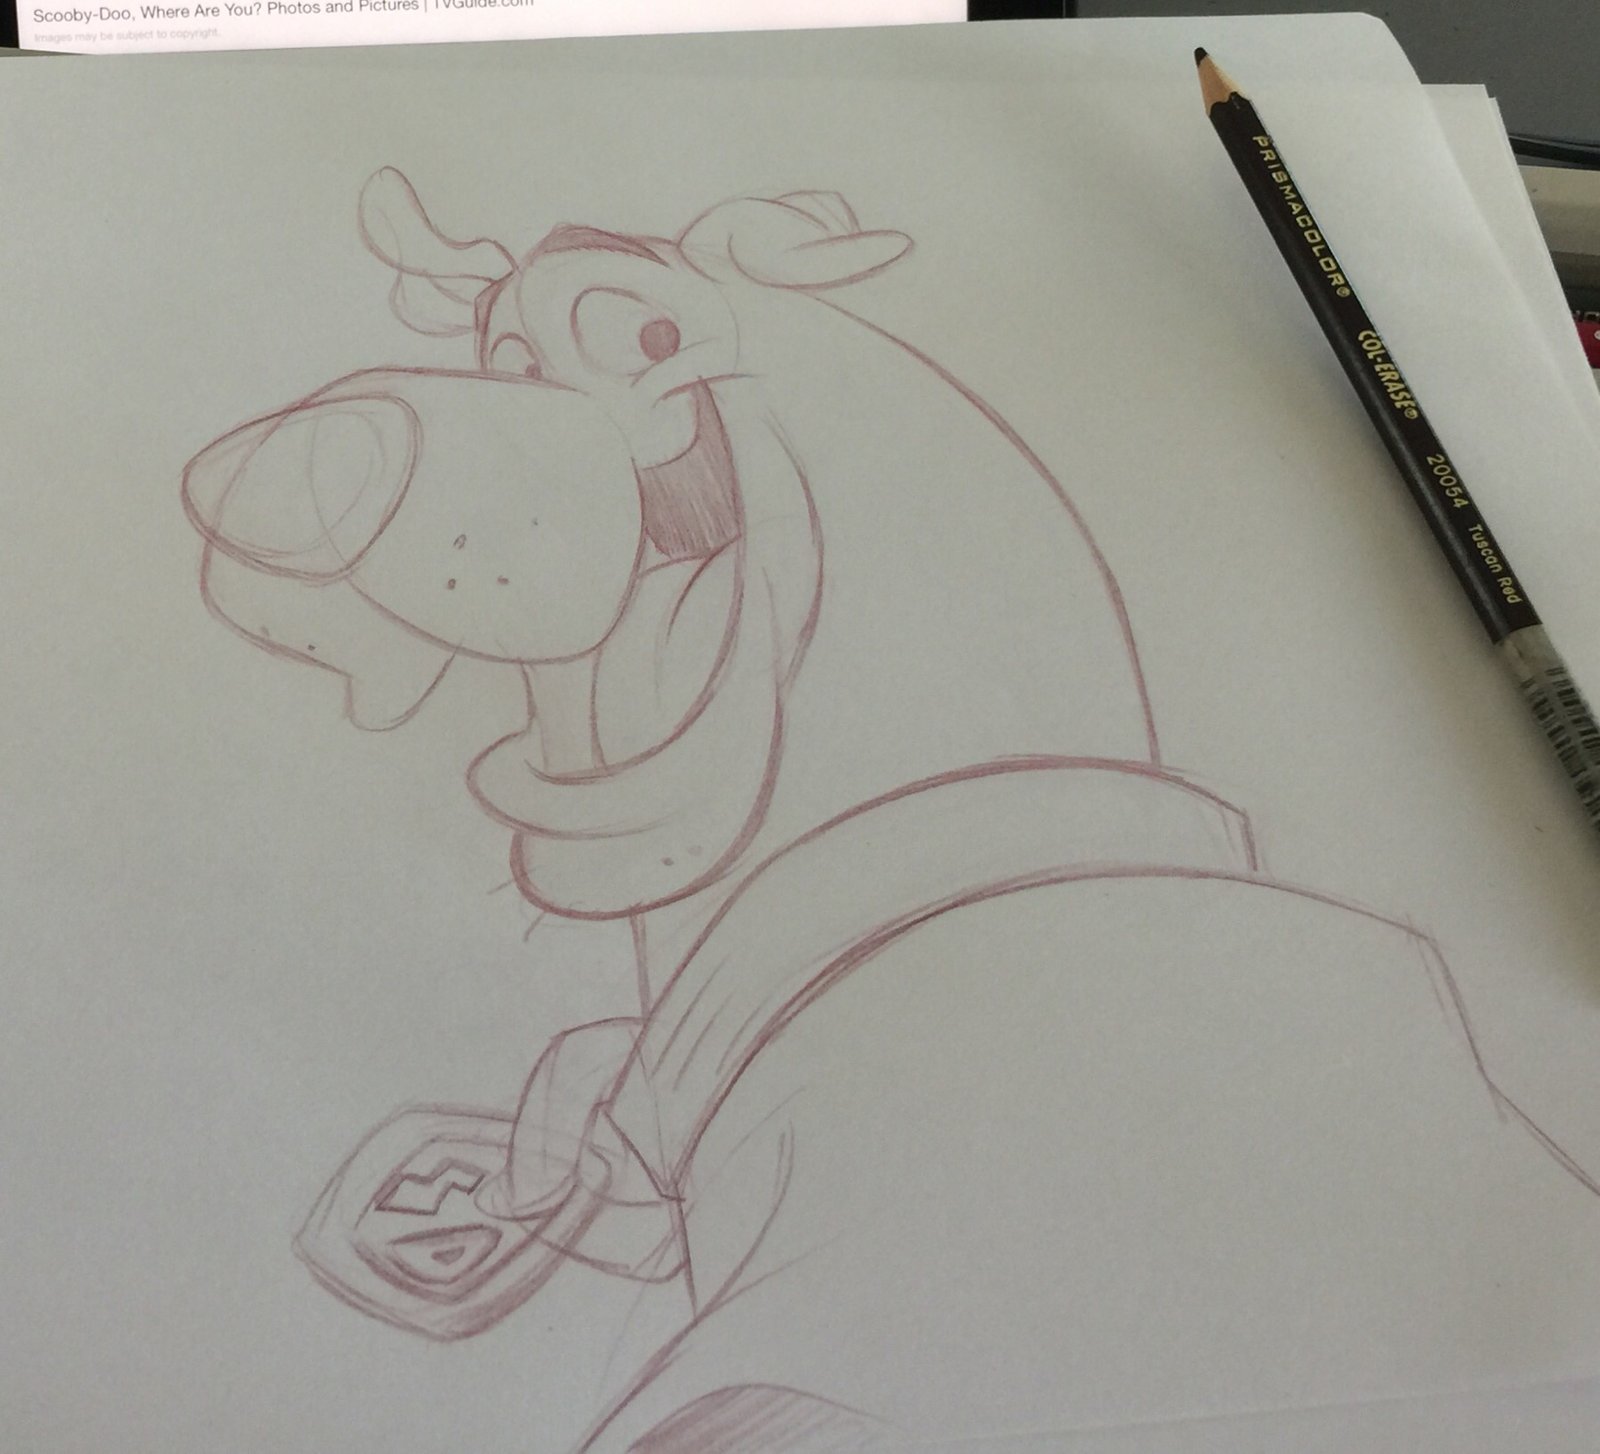 How To Draw Scooby Doo Step By Step Easy - YouTube